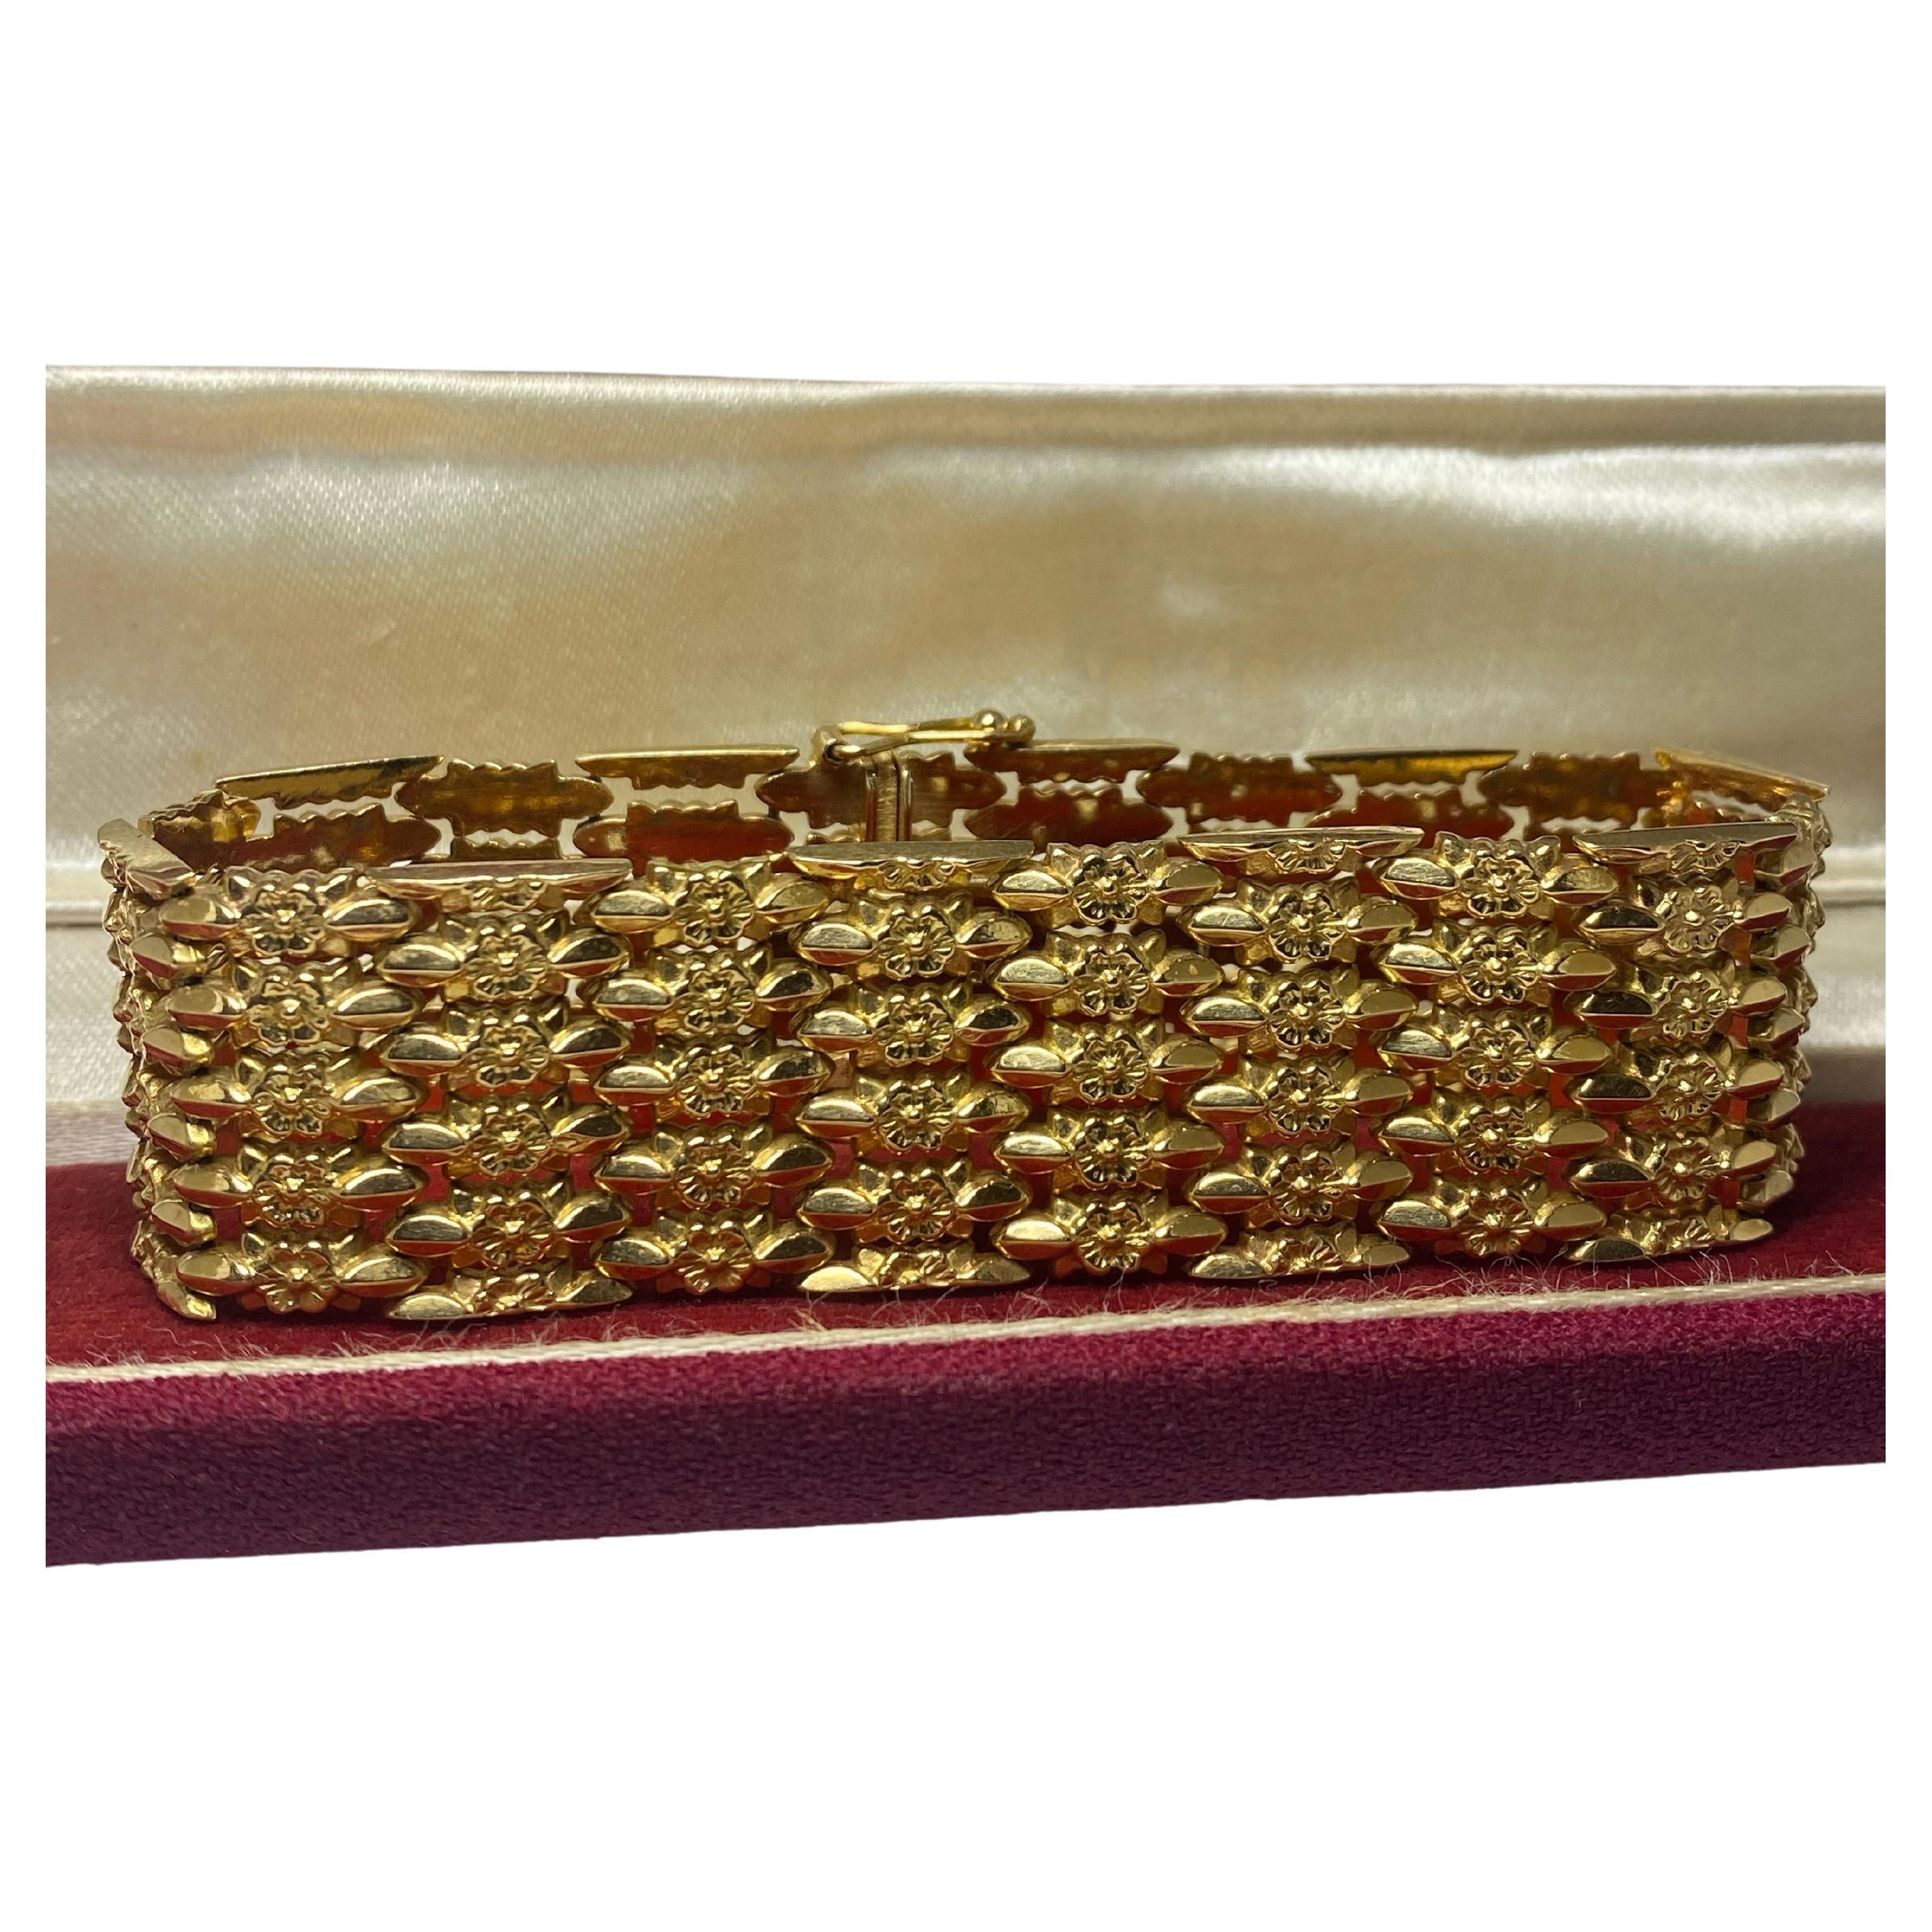 18K Yellow Gold Retro Embossed Floral Bracelet, Weight: 42.4gr. Italy c1950's